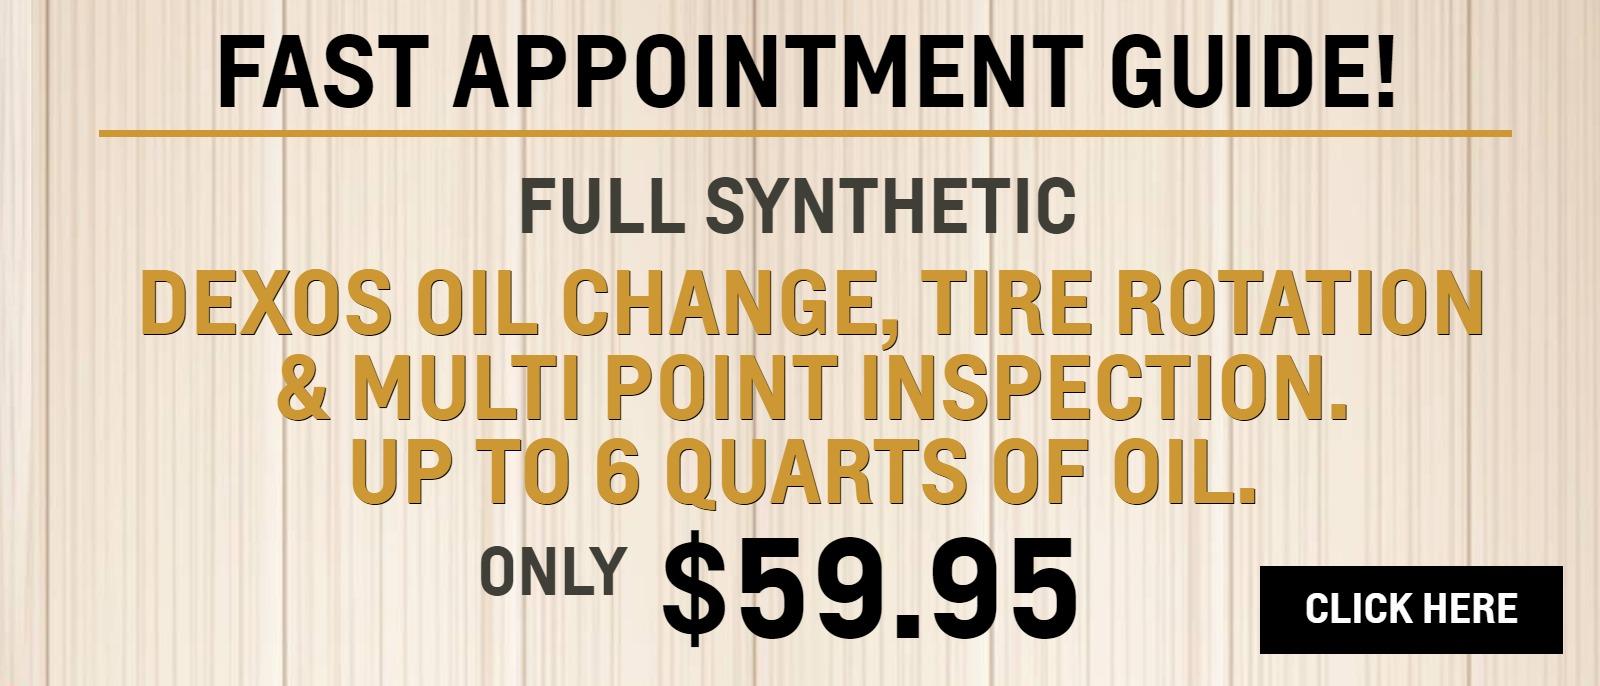 Full synthetic dexos oil change, tire rotation & multi point inspection ONLY $59.95.